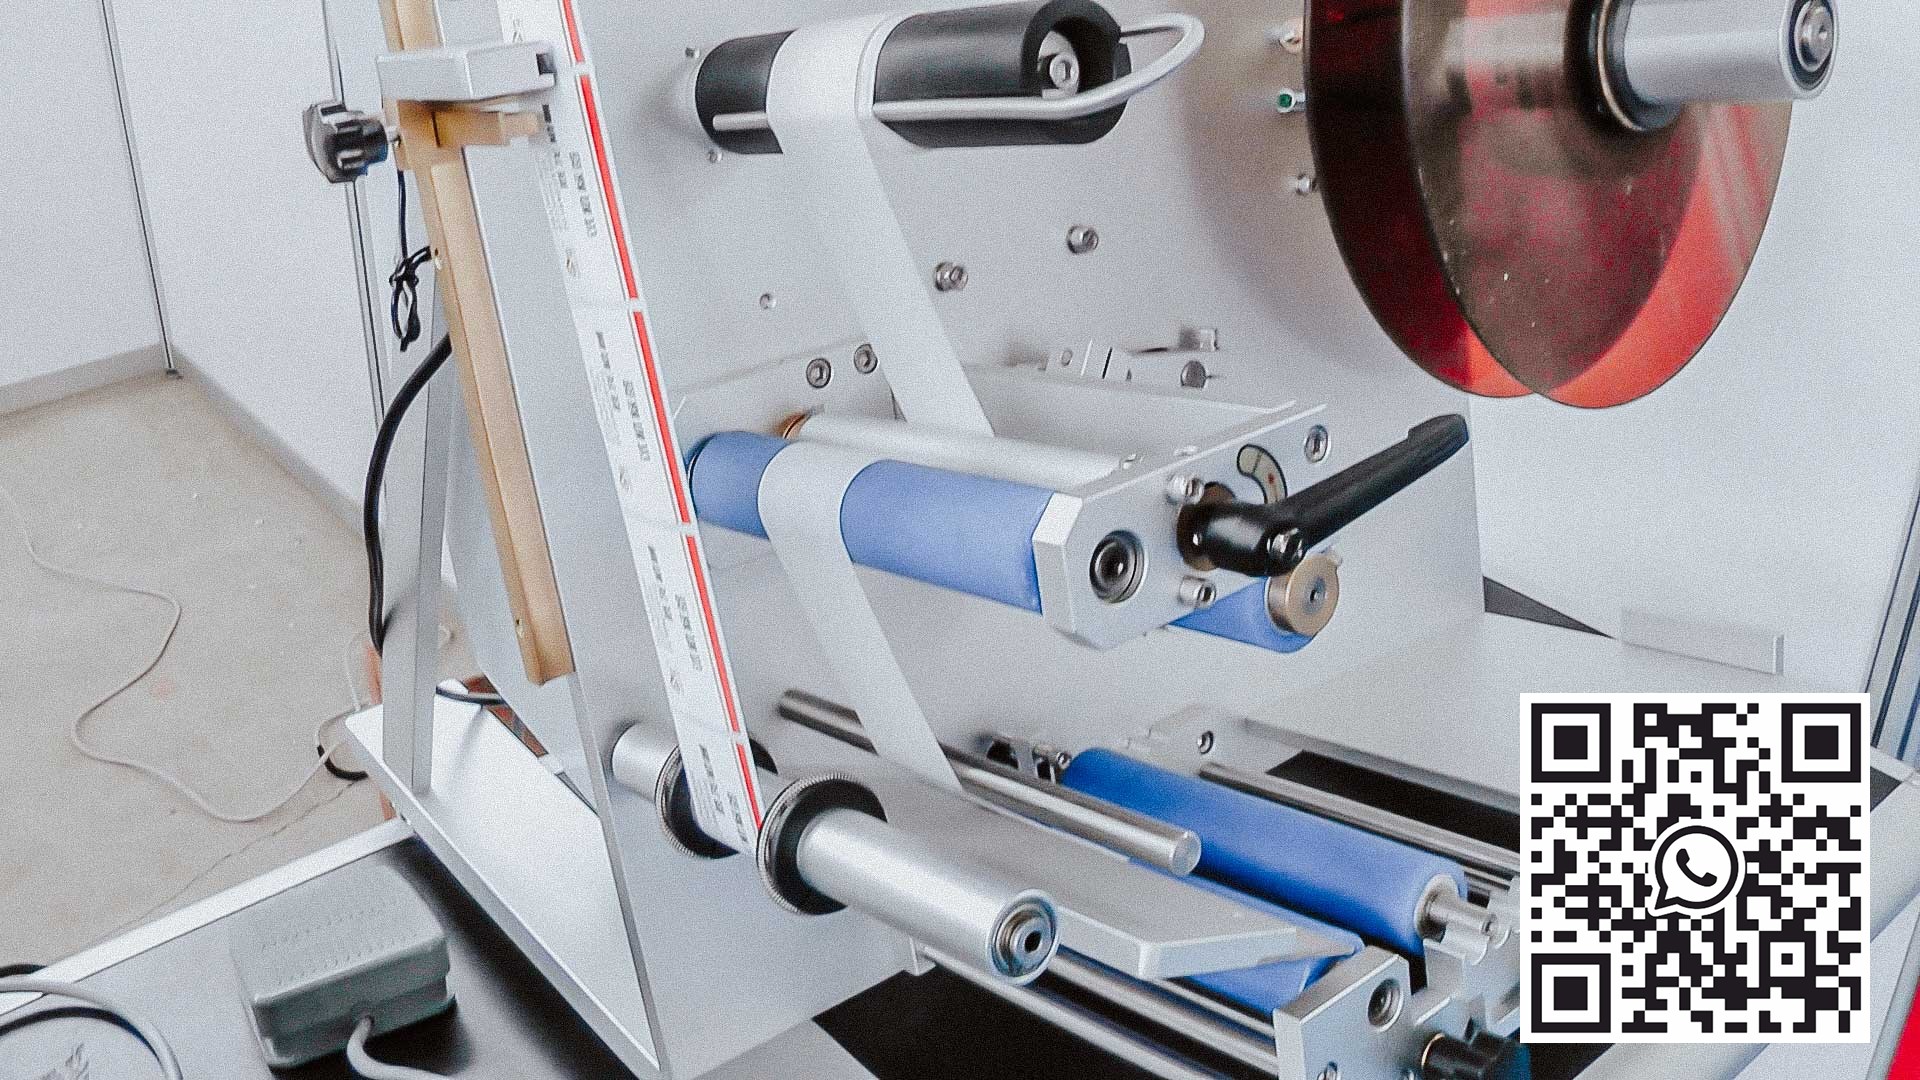 Desktop labeling machine for self-adhesive labels on plastic bottles with pharmacy products